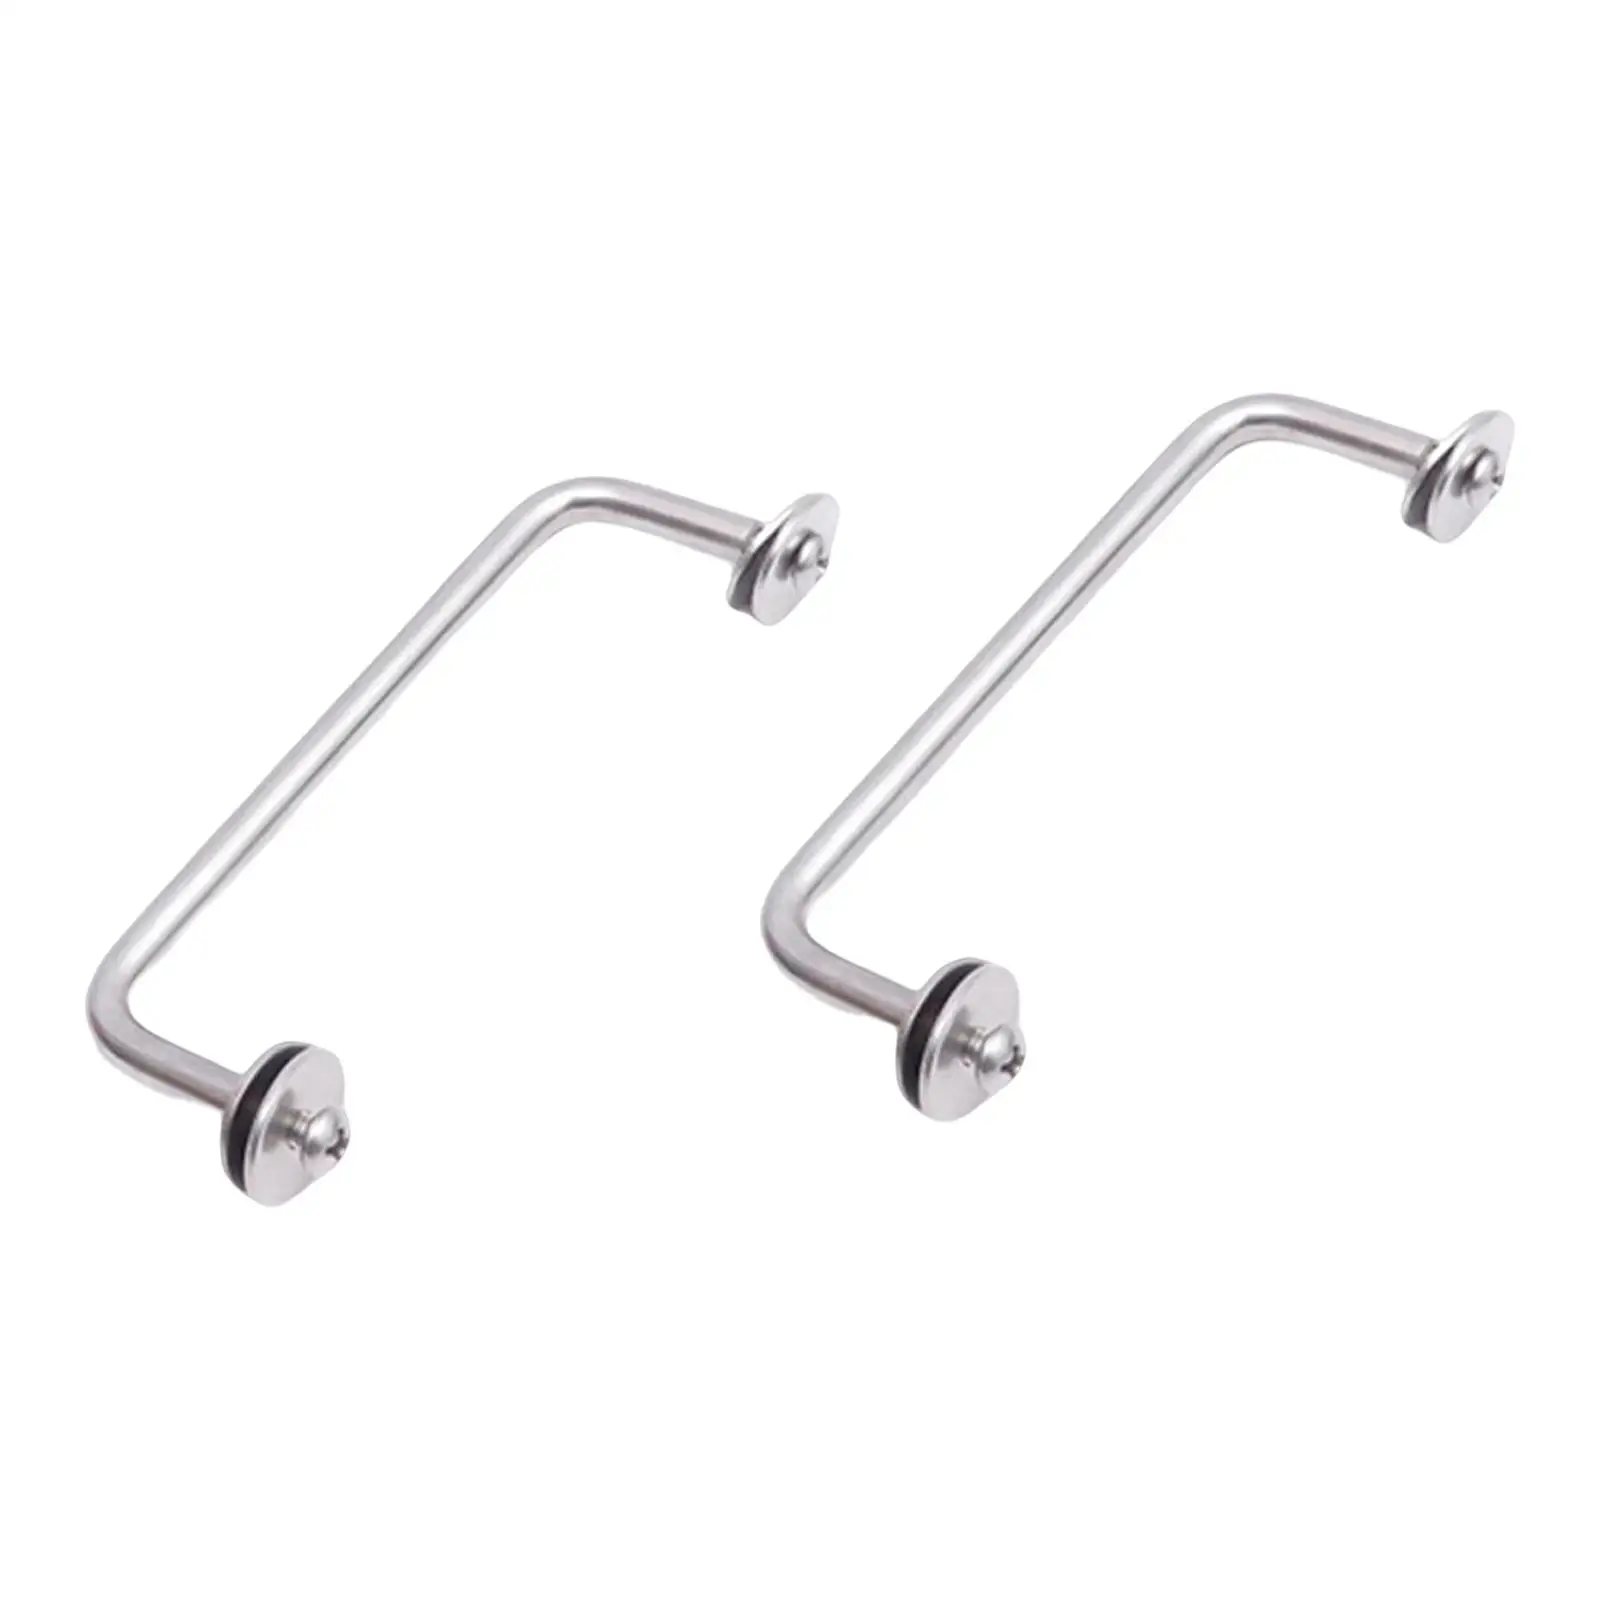 2Pcs Scuba Diving Buttplate Handle Stainless Steel for Underwater Sports